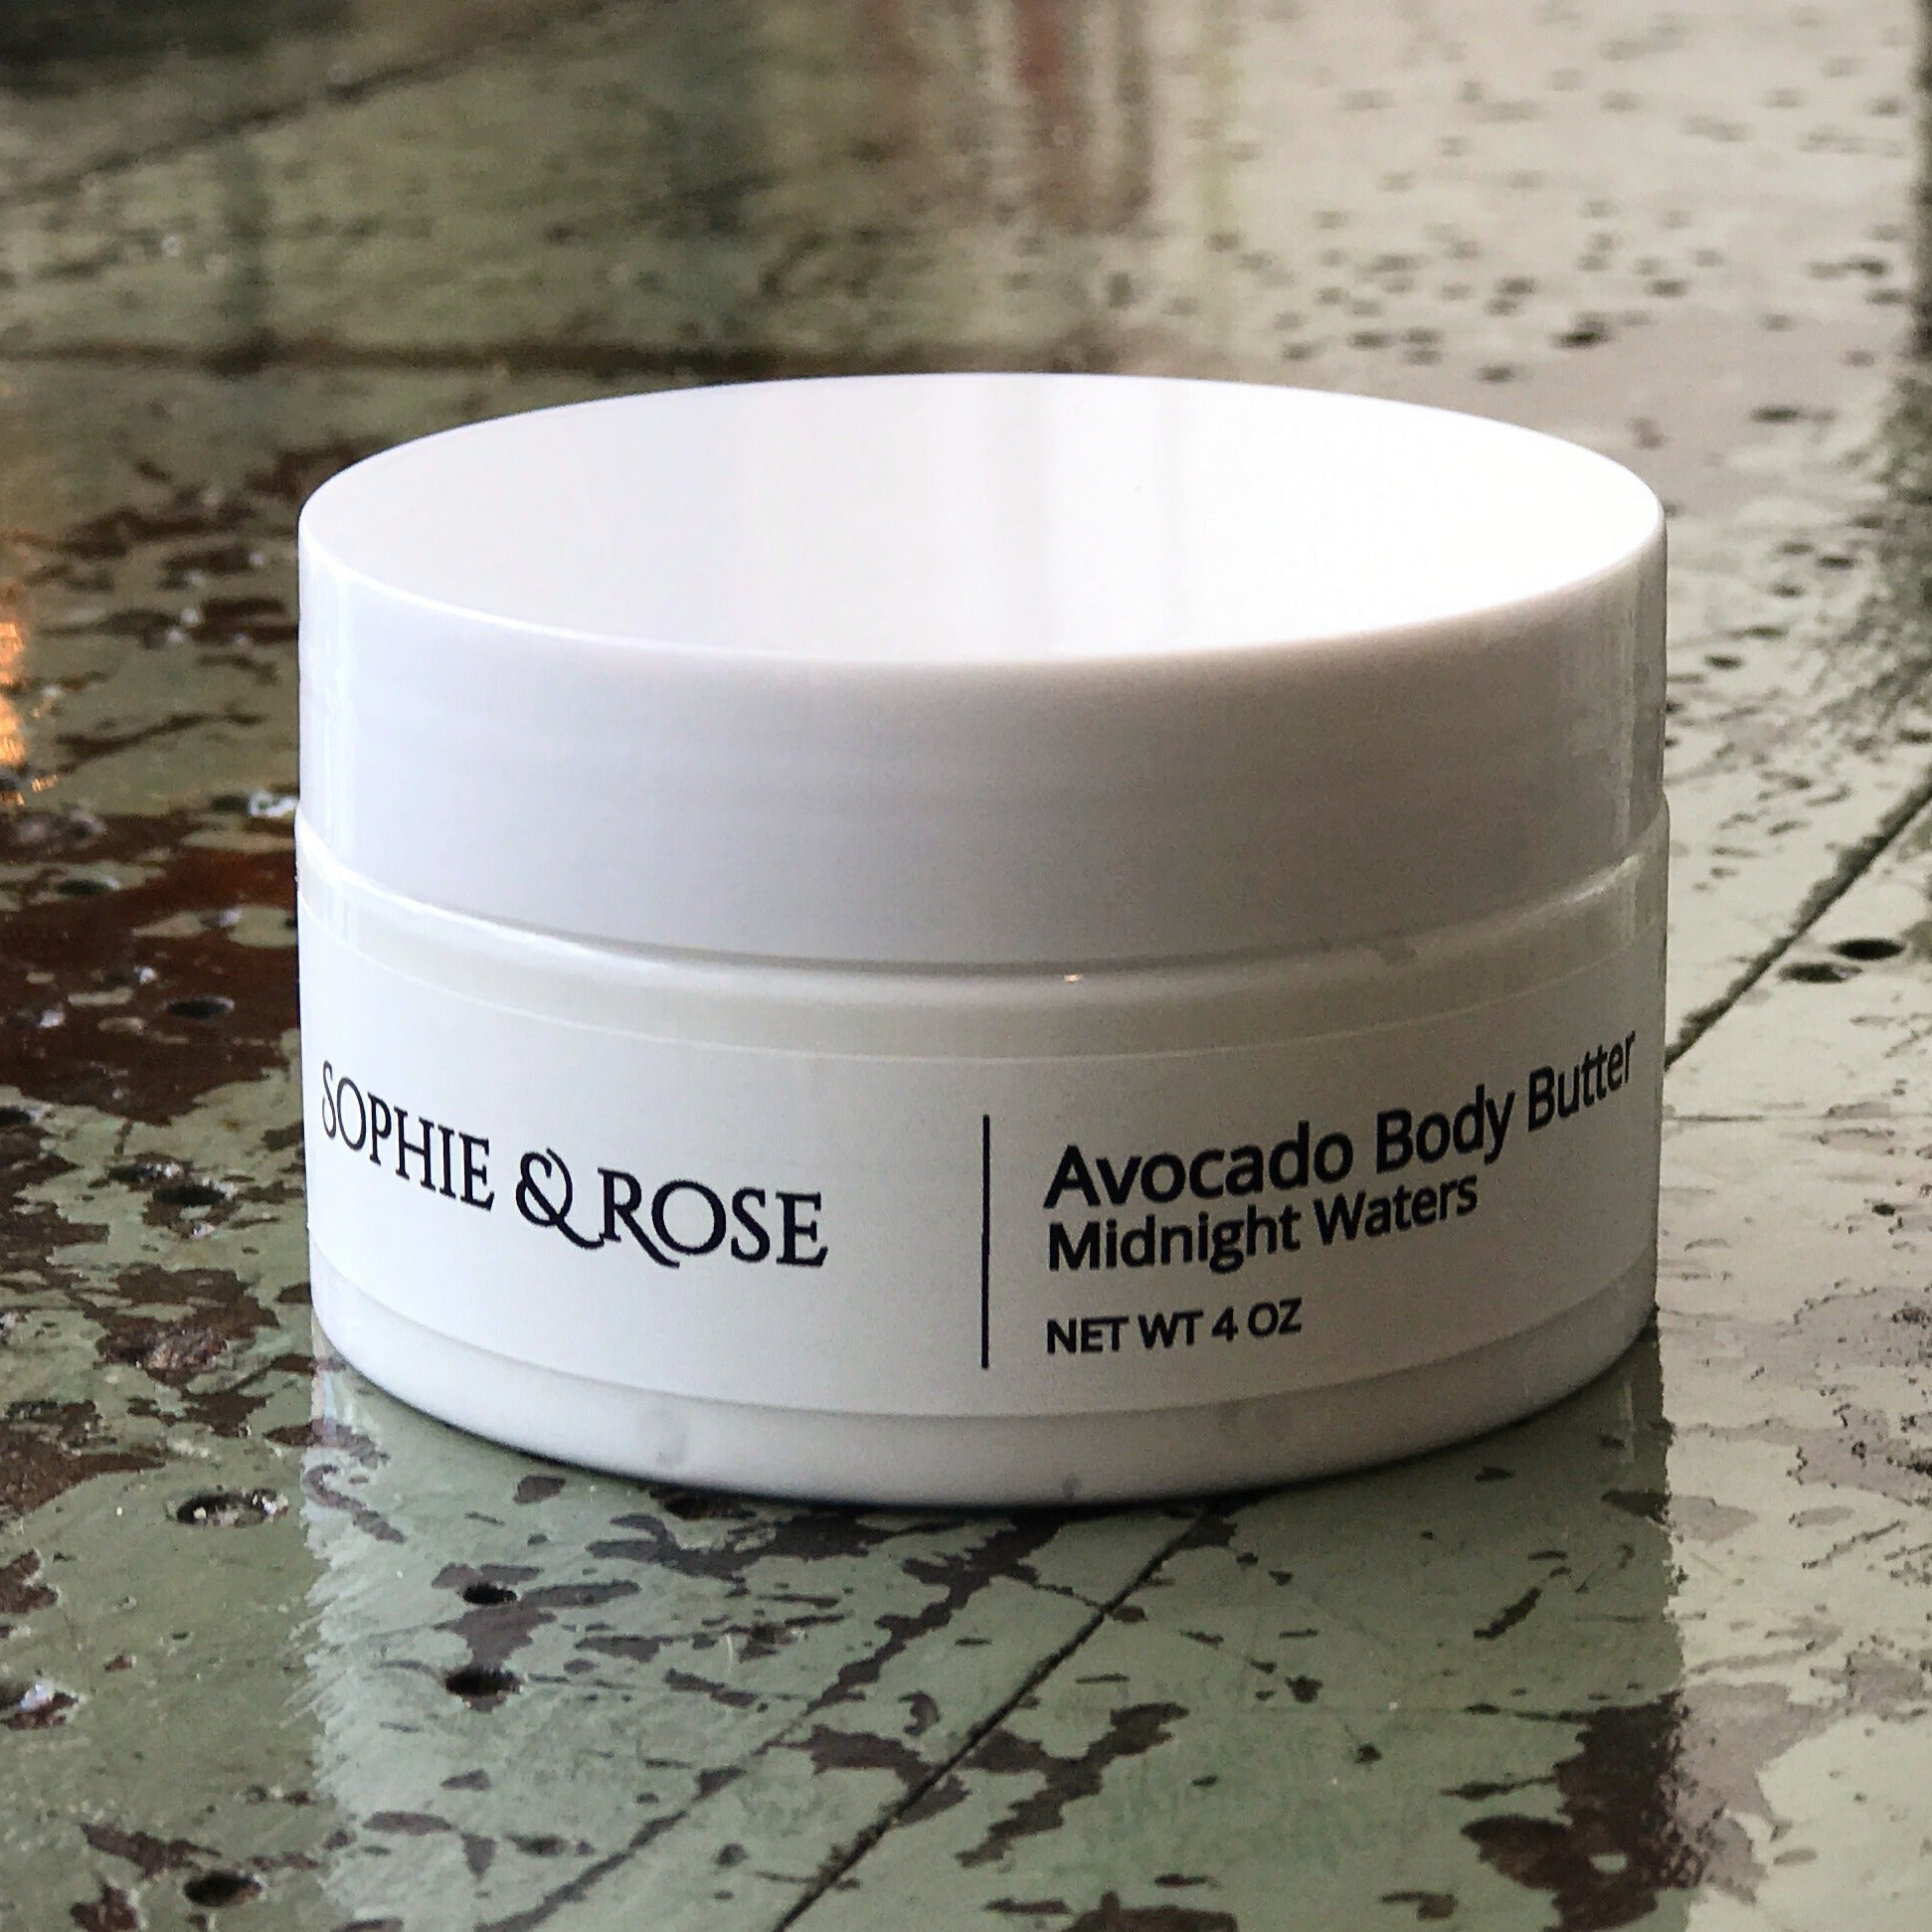 Avocado Body Butter ~ Cashmere Vanilla - Sophie and Rose